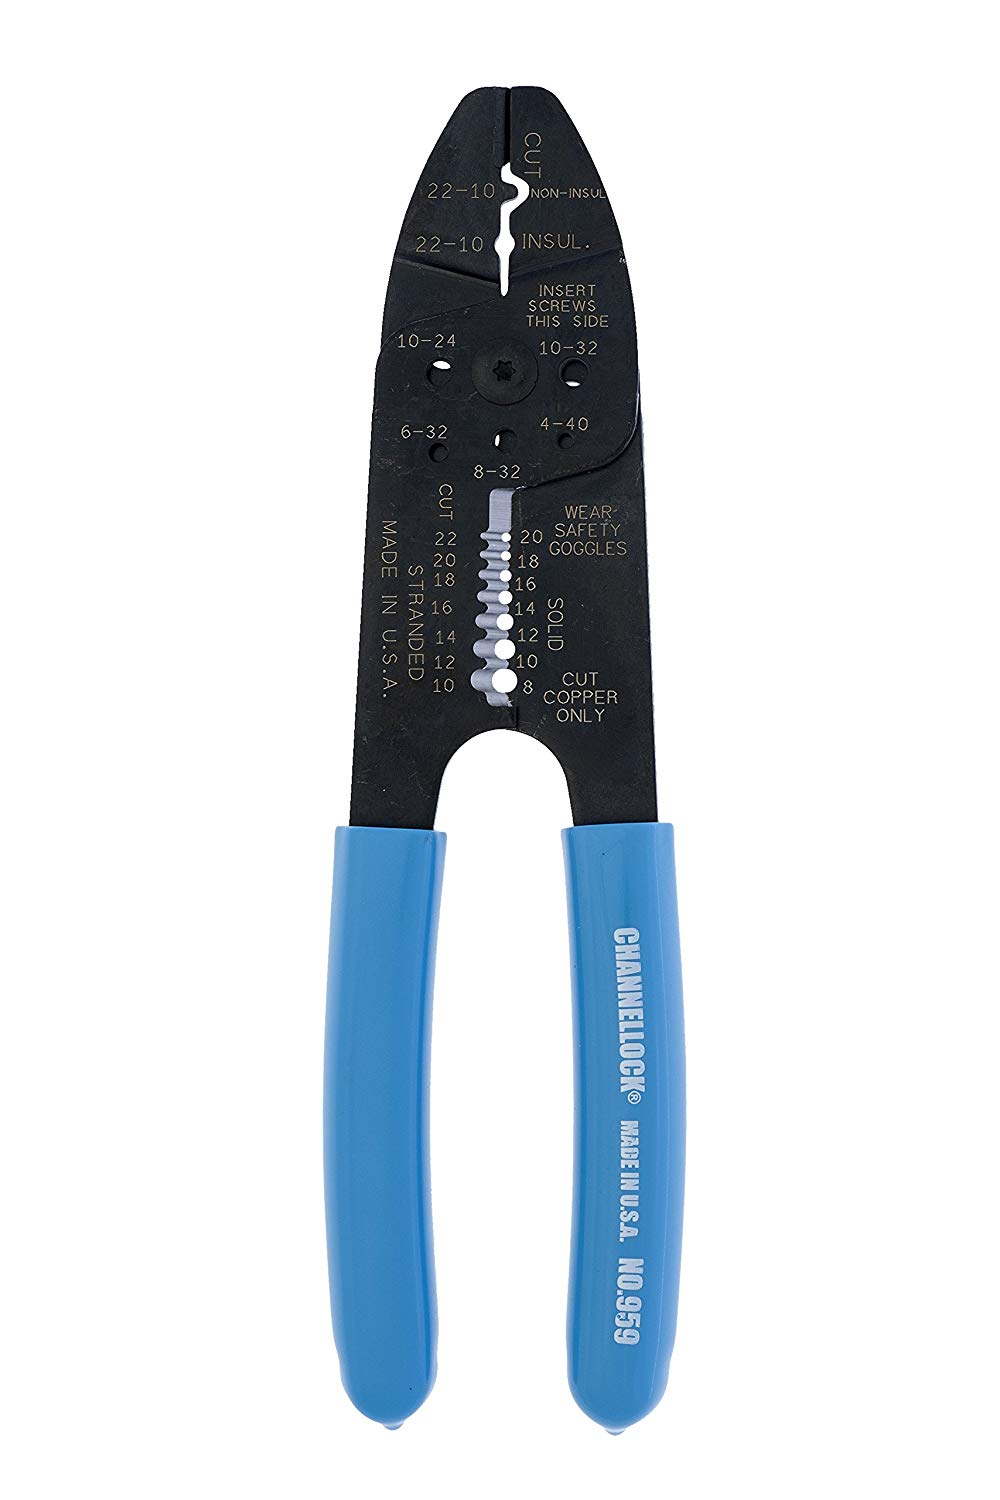 ChannelLock 959 - 8" Wire Stripper - wise-line-tools